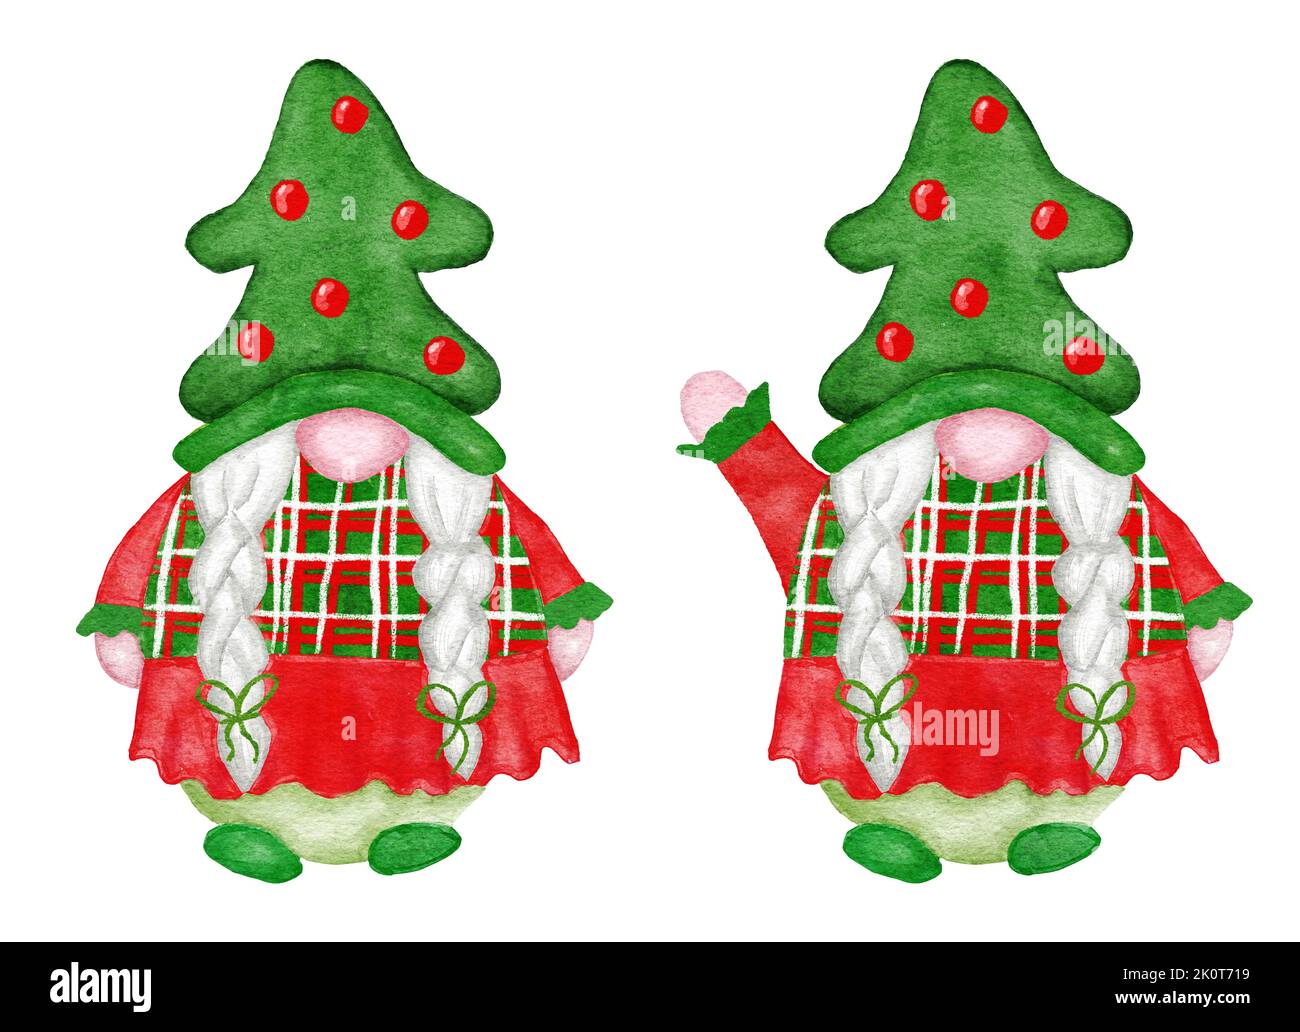 Merry christmas tree kawaii style Cut Out Stock Images & Pictures - Alamy